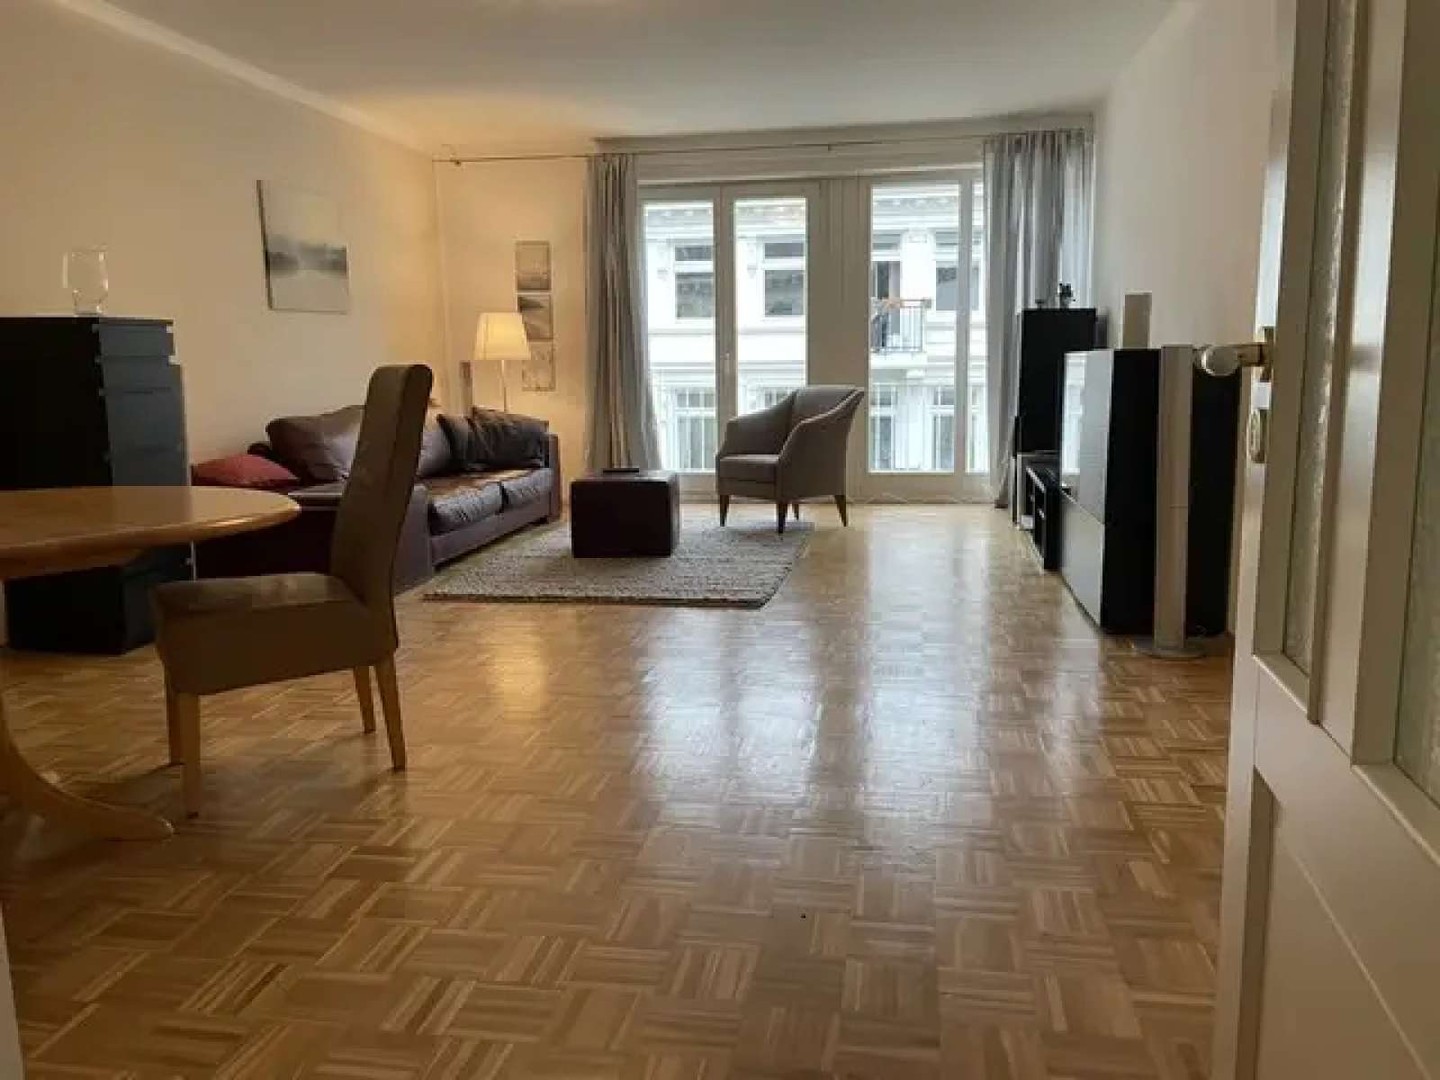 Accommodation in the centre of hamburg